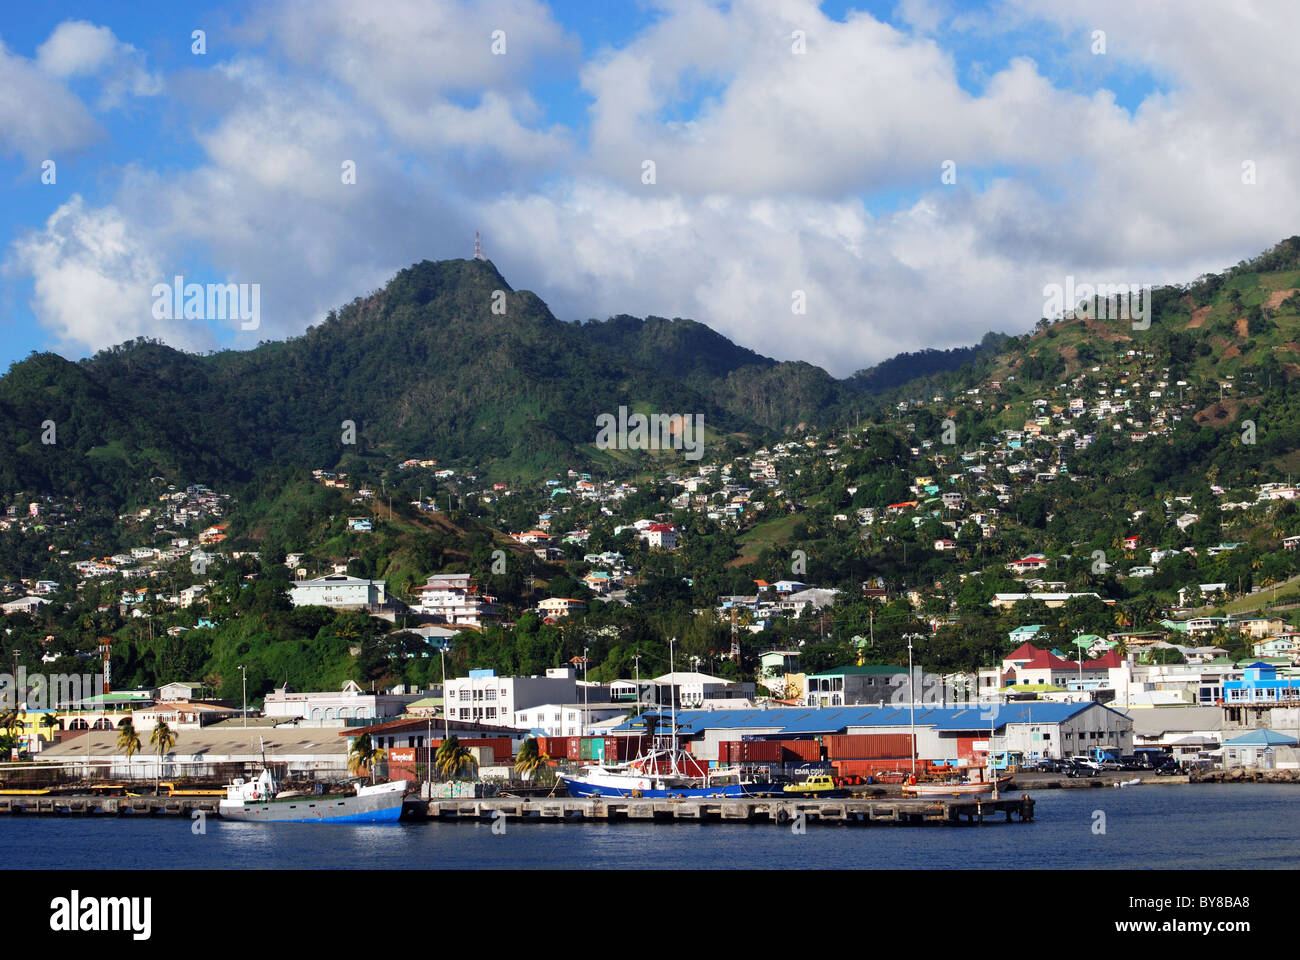 View of the quayside with the town to the rear, Kingstown, St. Vincent and the Grenadines, Caribbean. Stock Photo